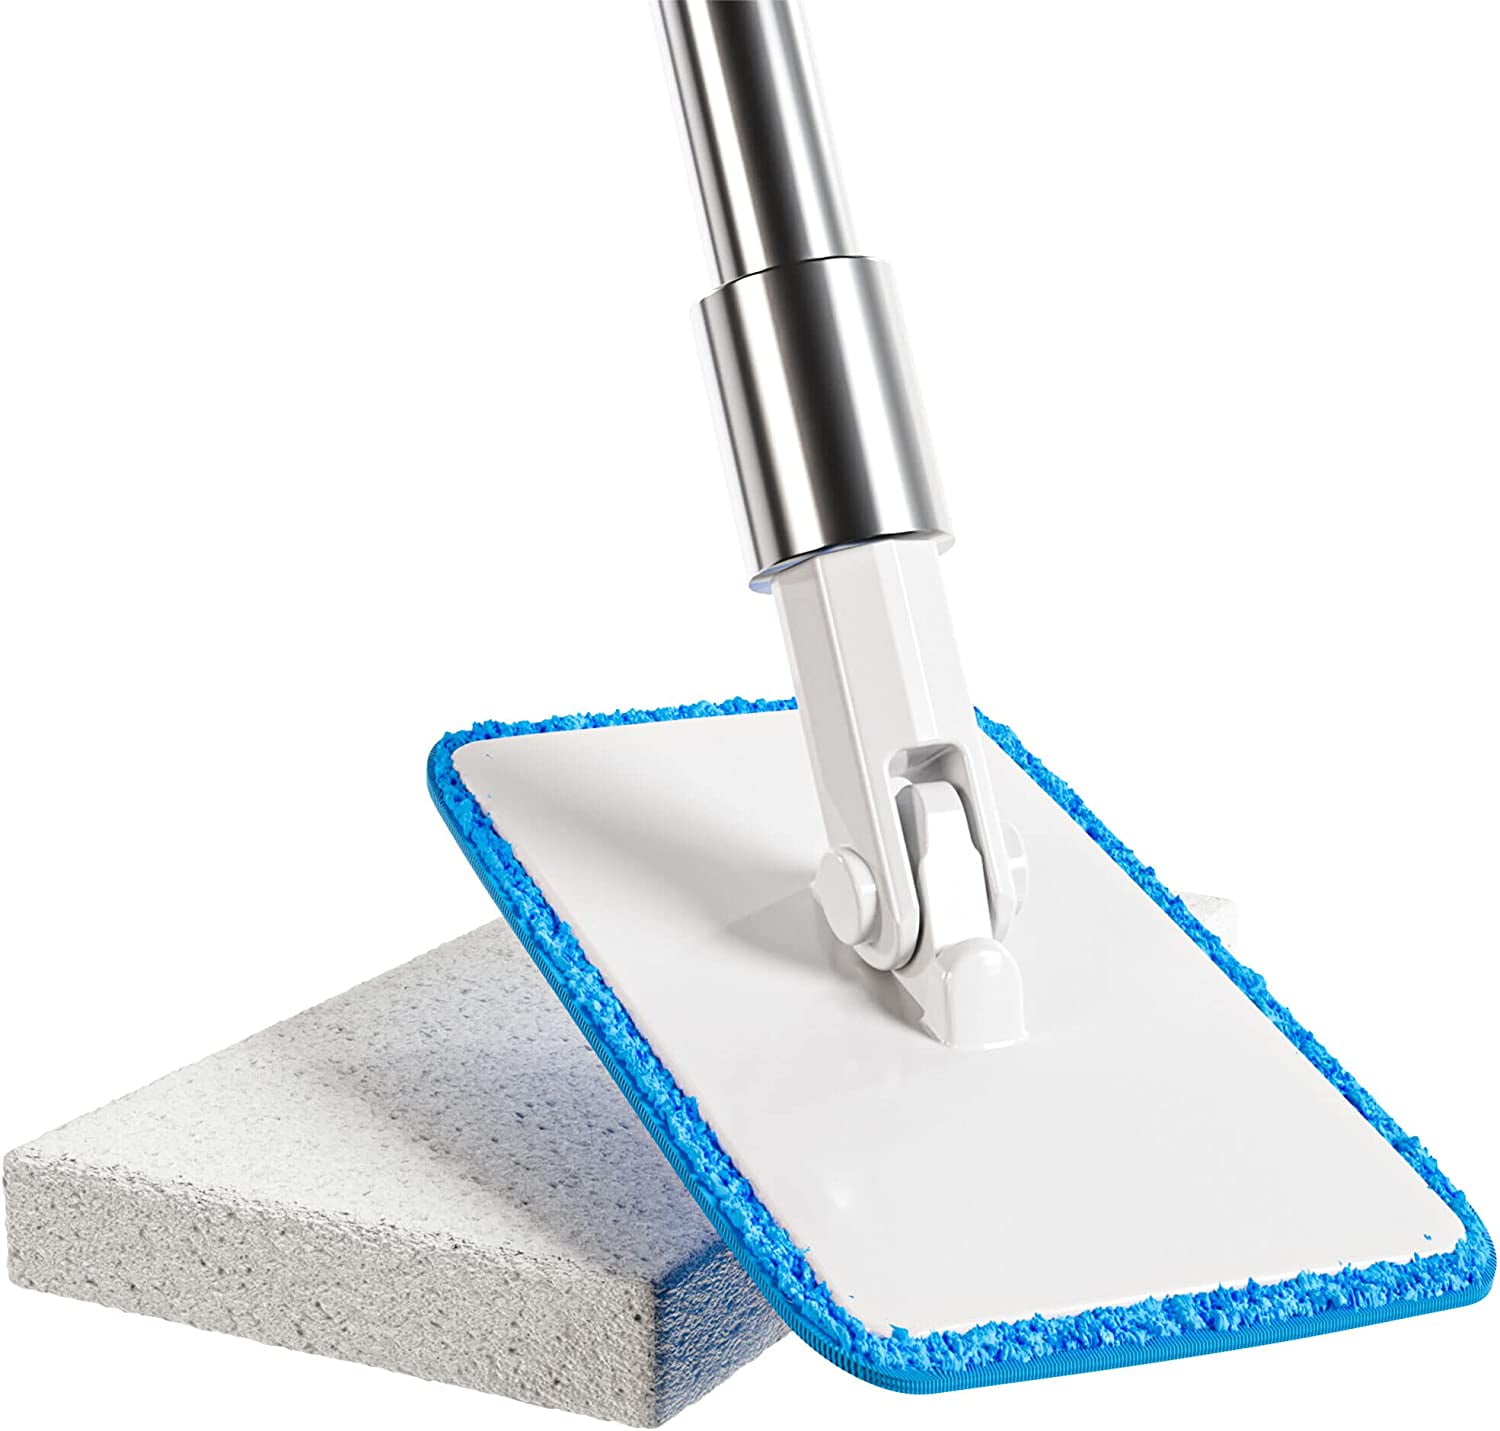 Baseboard Cleaner Tool with Handle, Wall Cleaner with Extendable